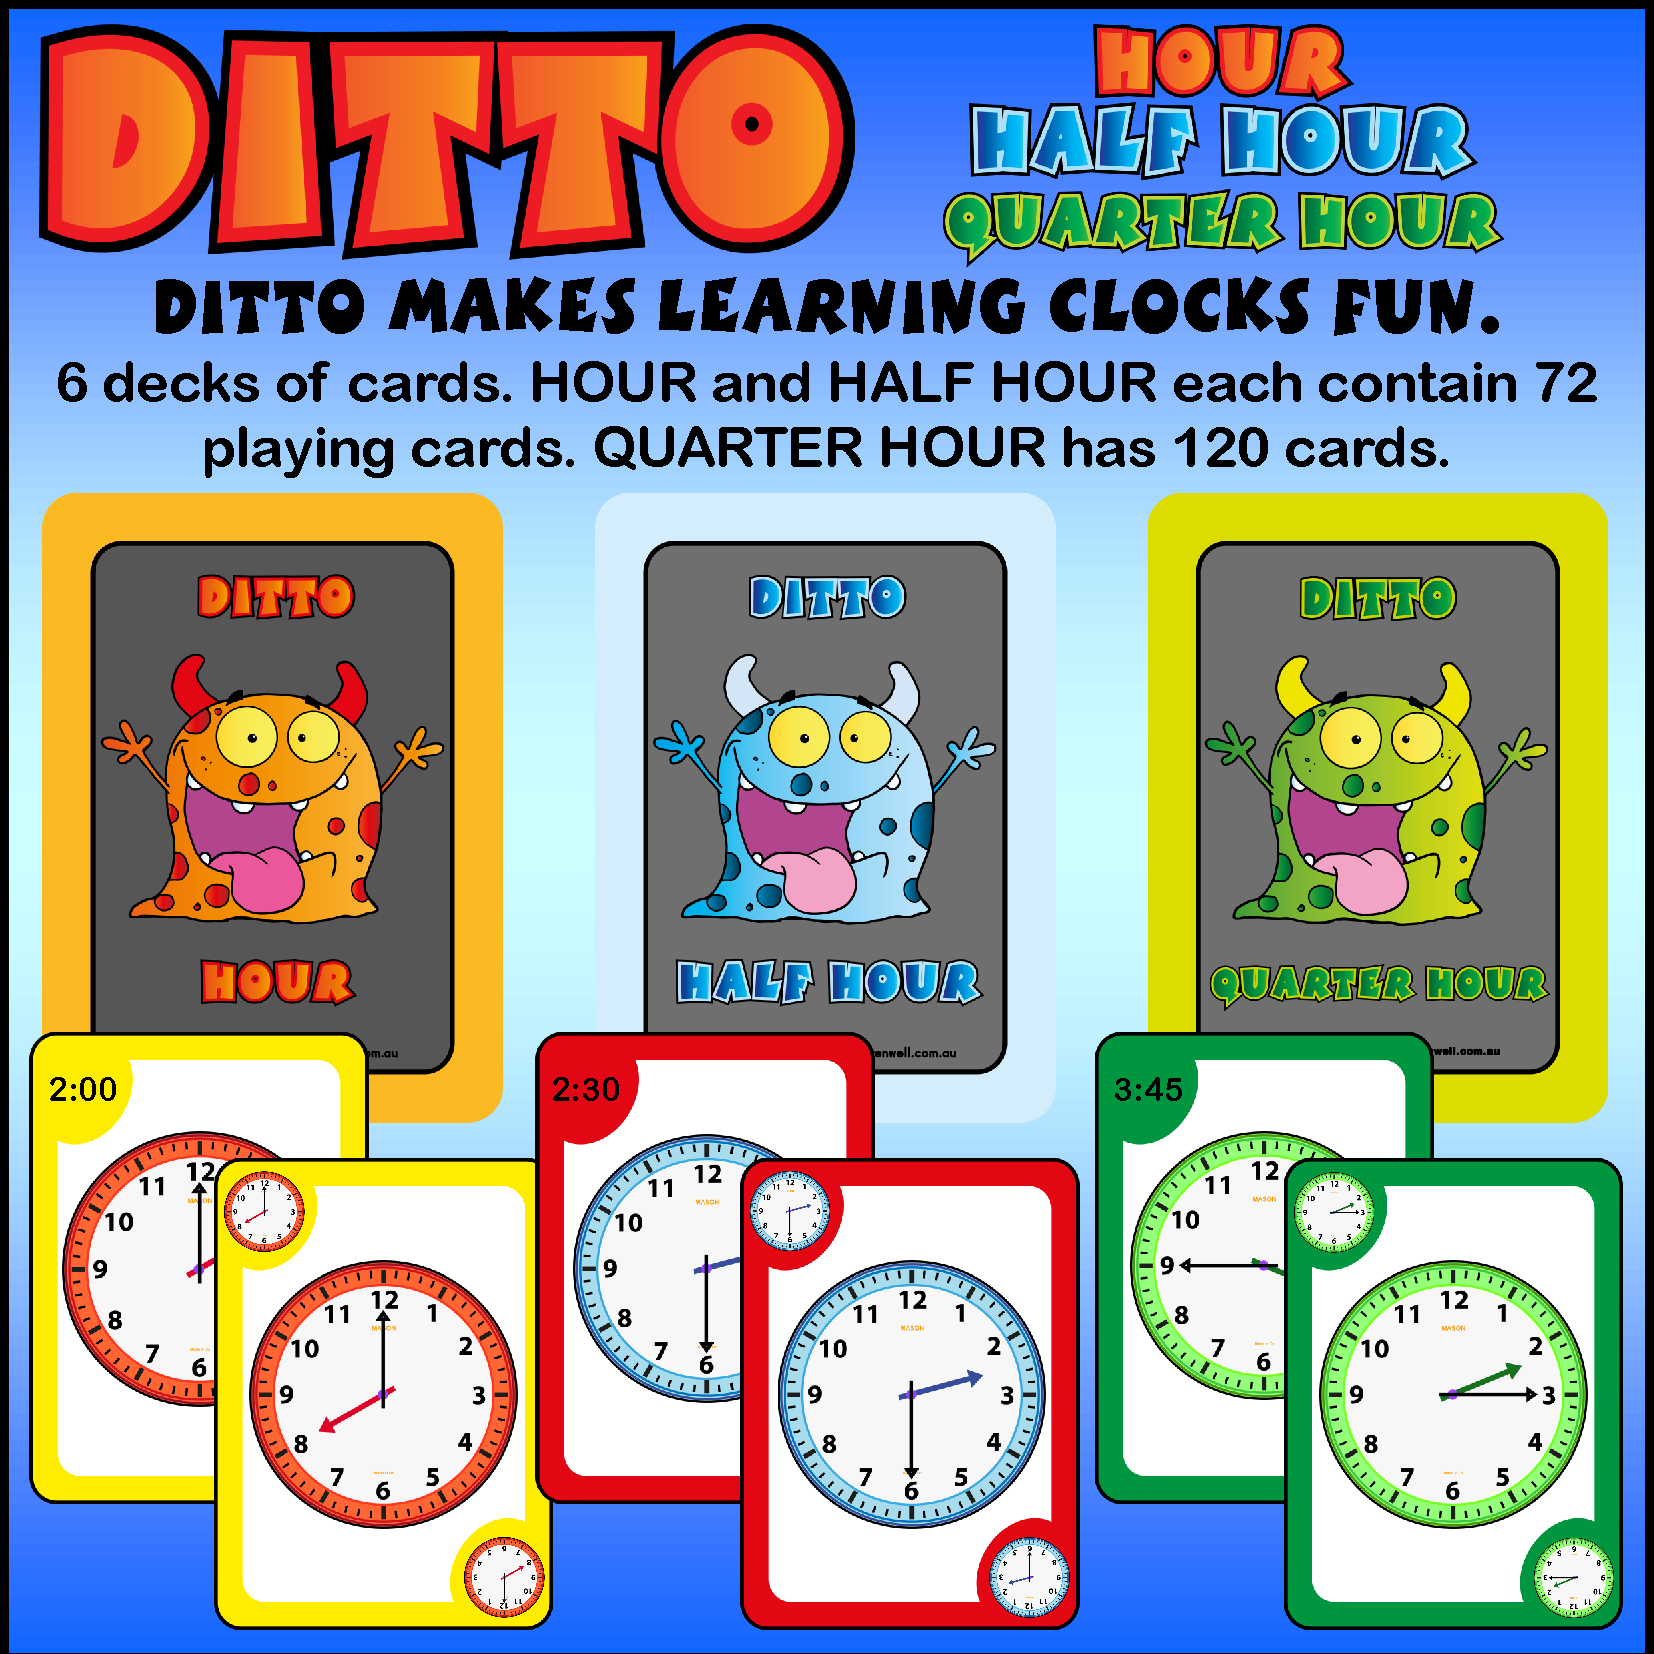 CLOCK FUN WITH DITTO - 6 DECKS OF CARDS